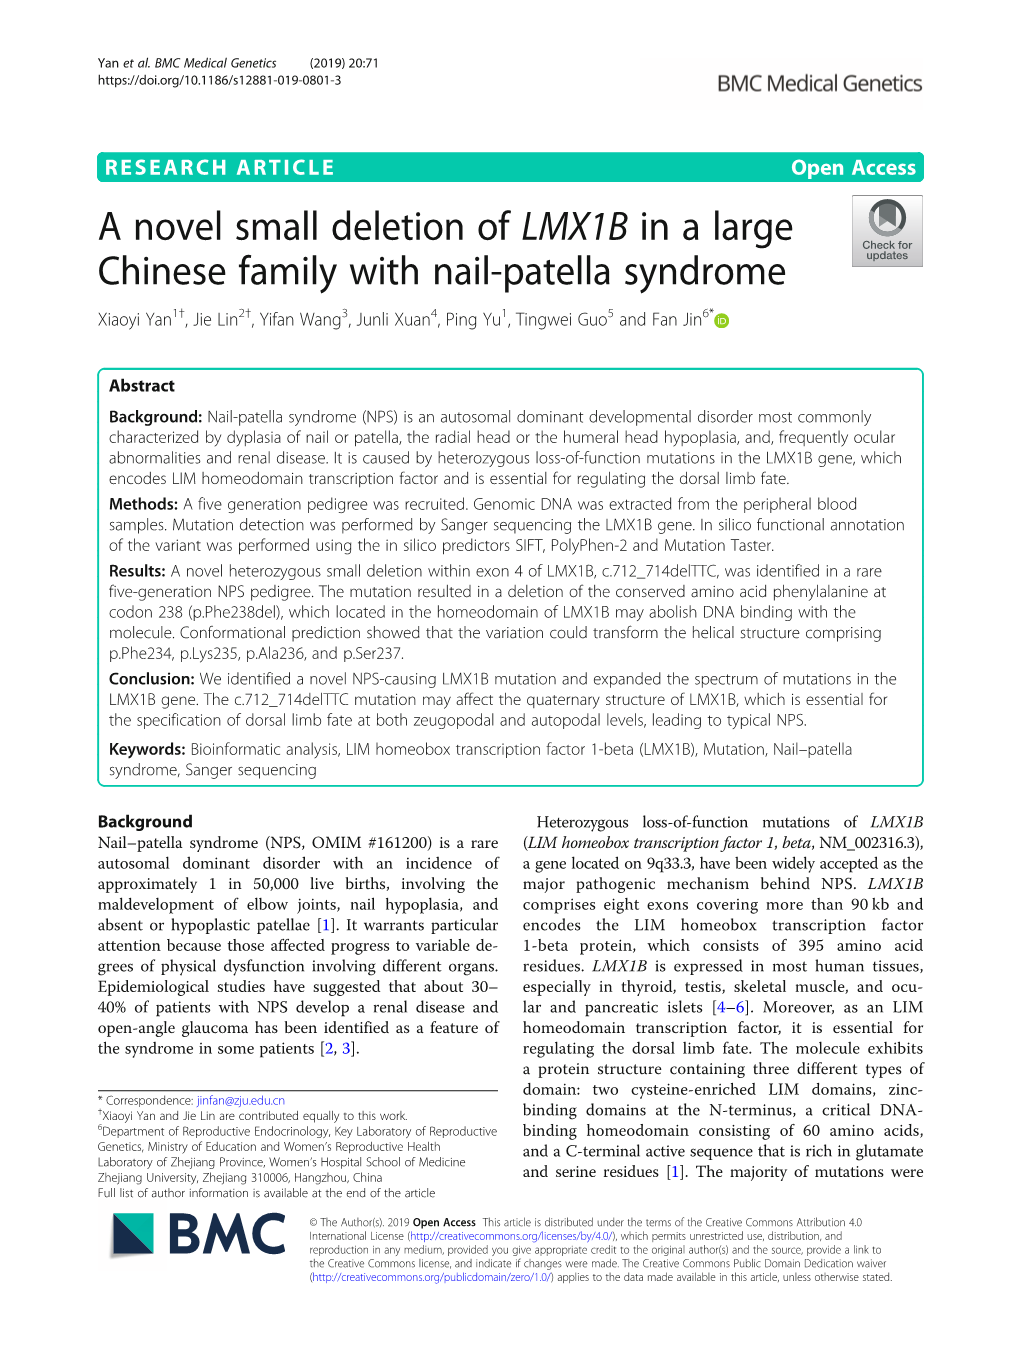 A Novel Small Deletion of LMX1B in a Large Chinese Family with Nail